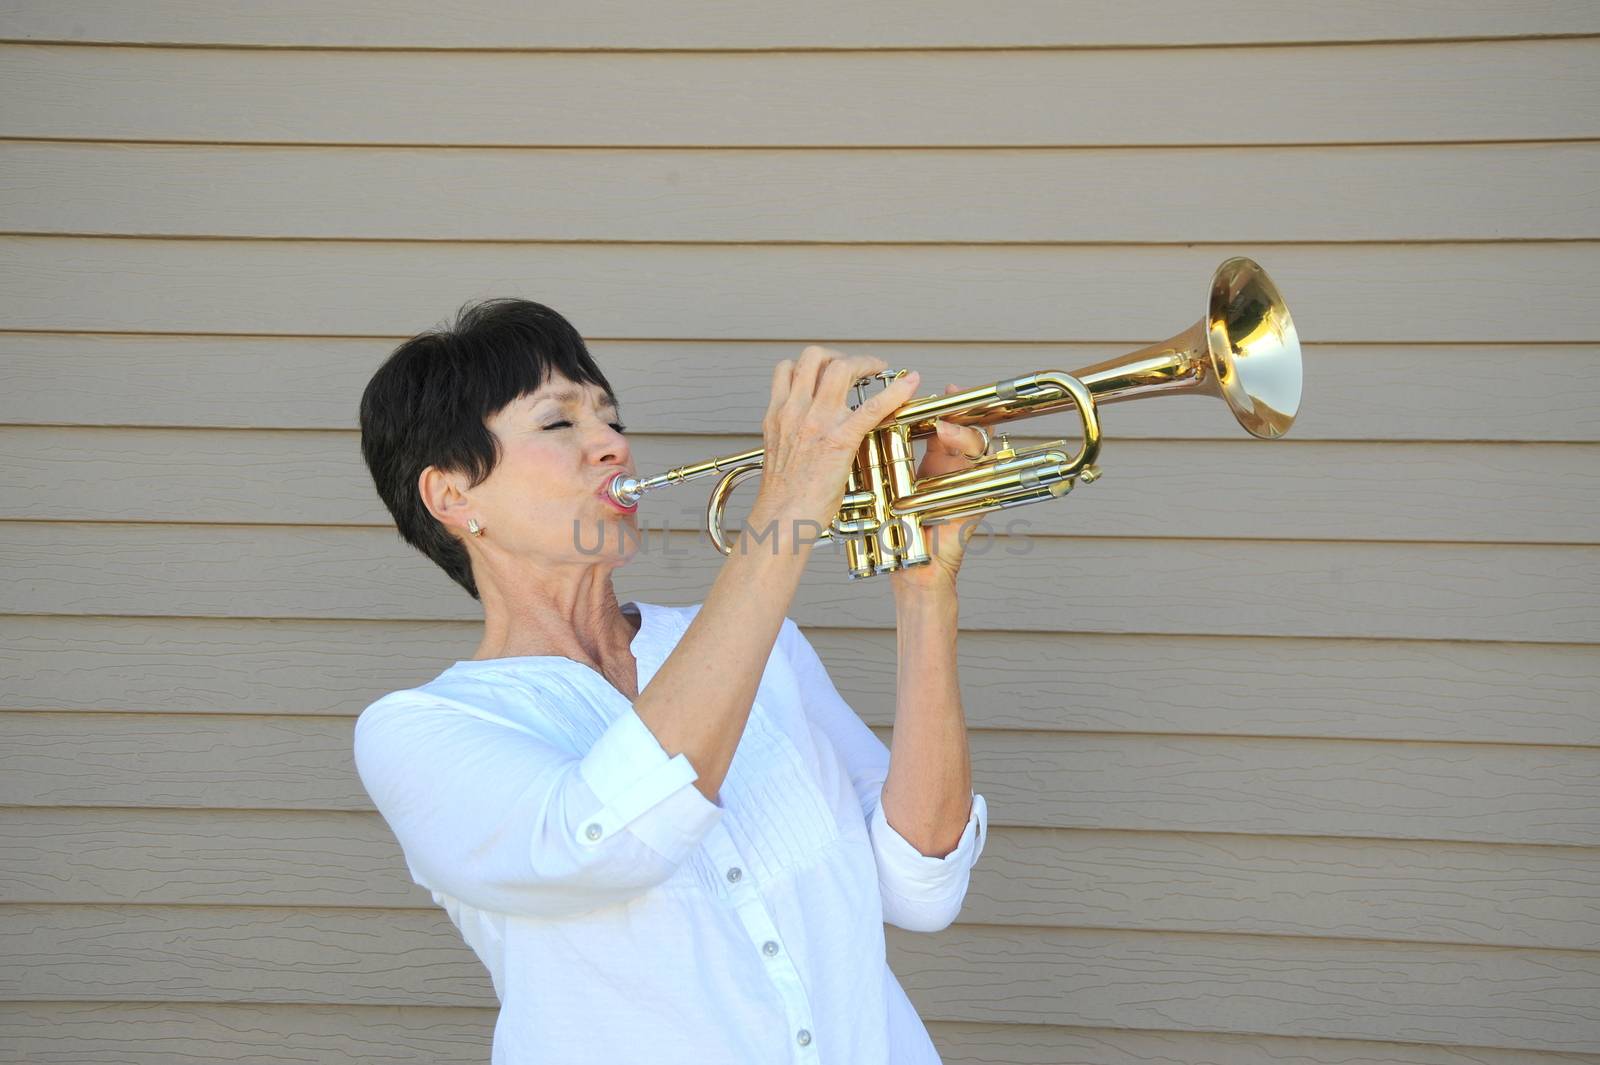 Mature female beauty blowing her trumpet outside.